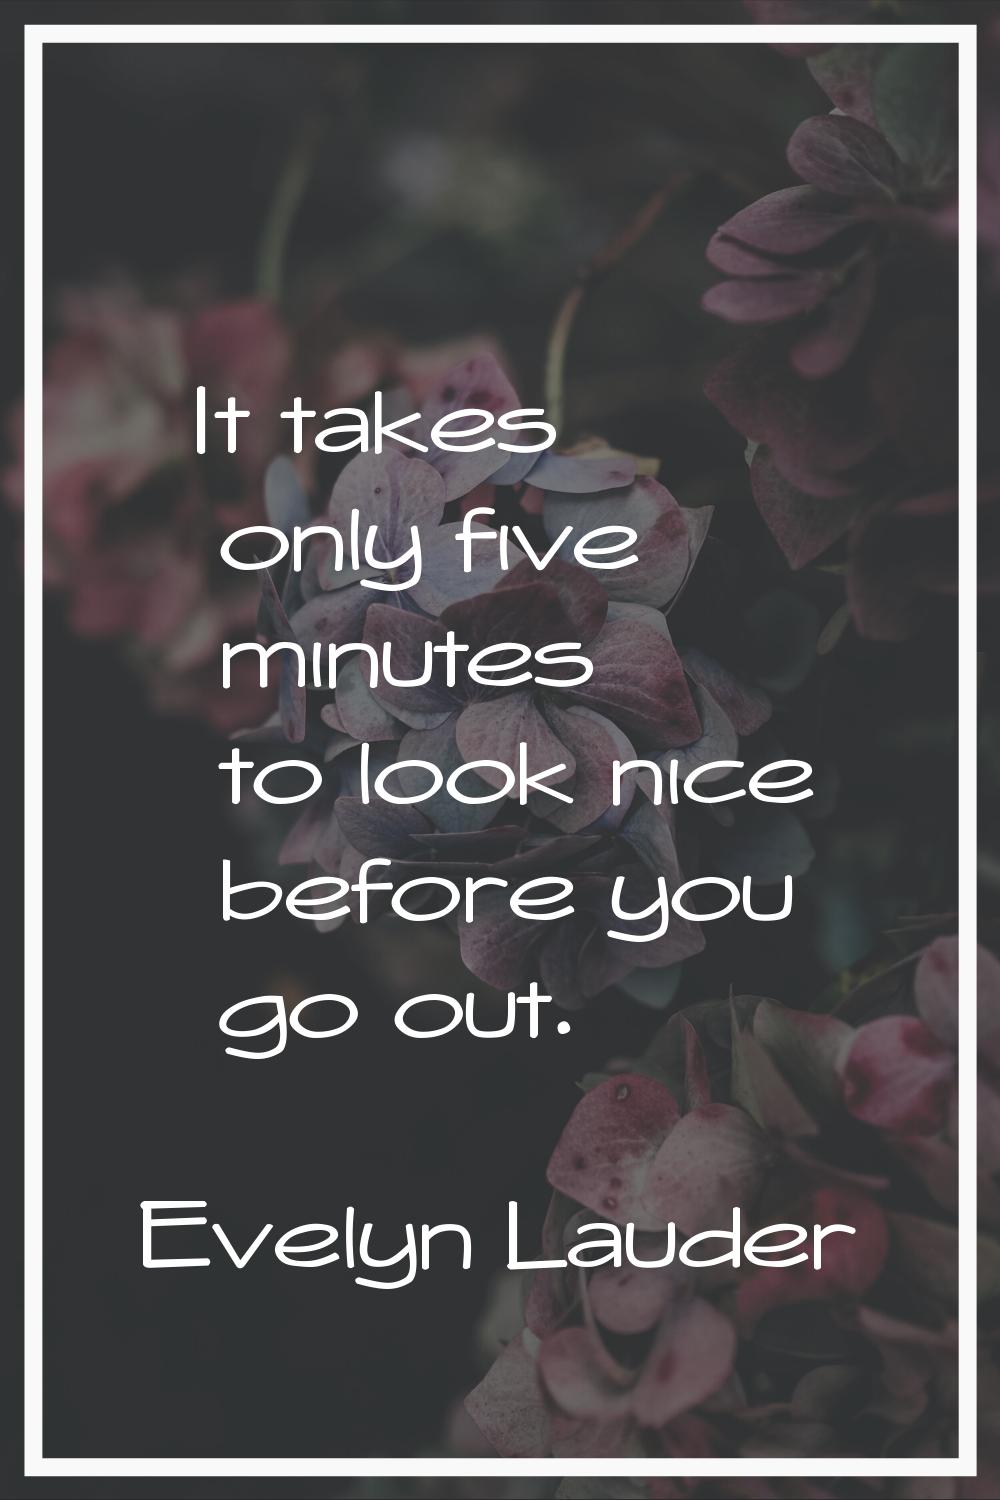 It takes only five minutes to look nice before you go out.